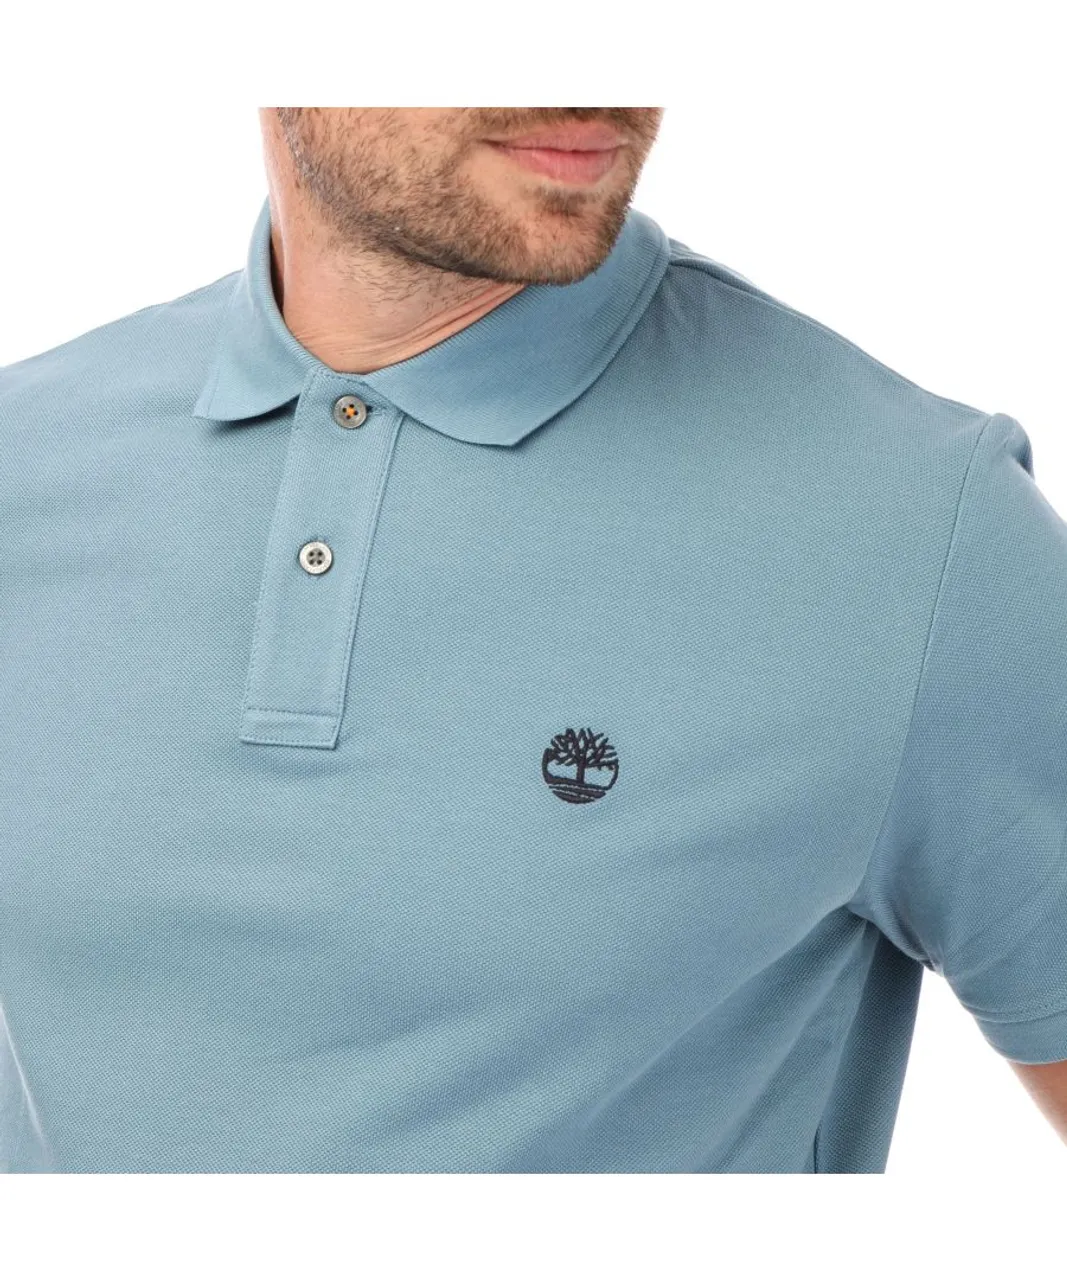 Timberland Mens Millers River Polo Shirt in Blue Cotton